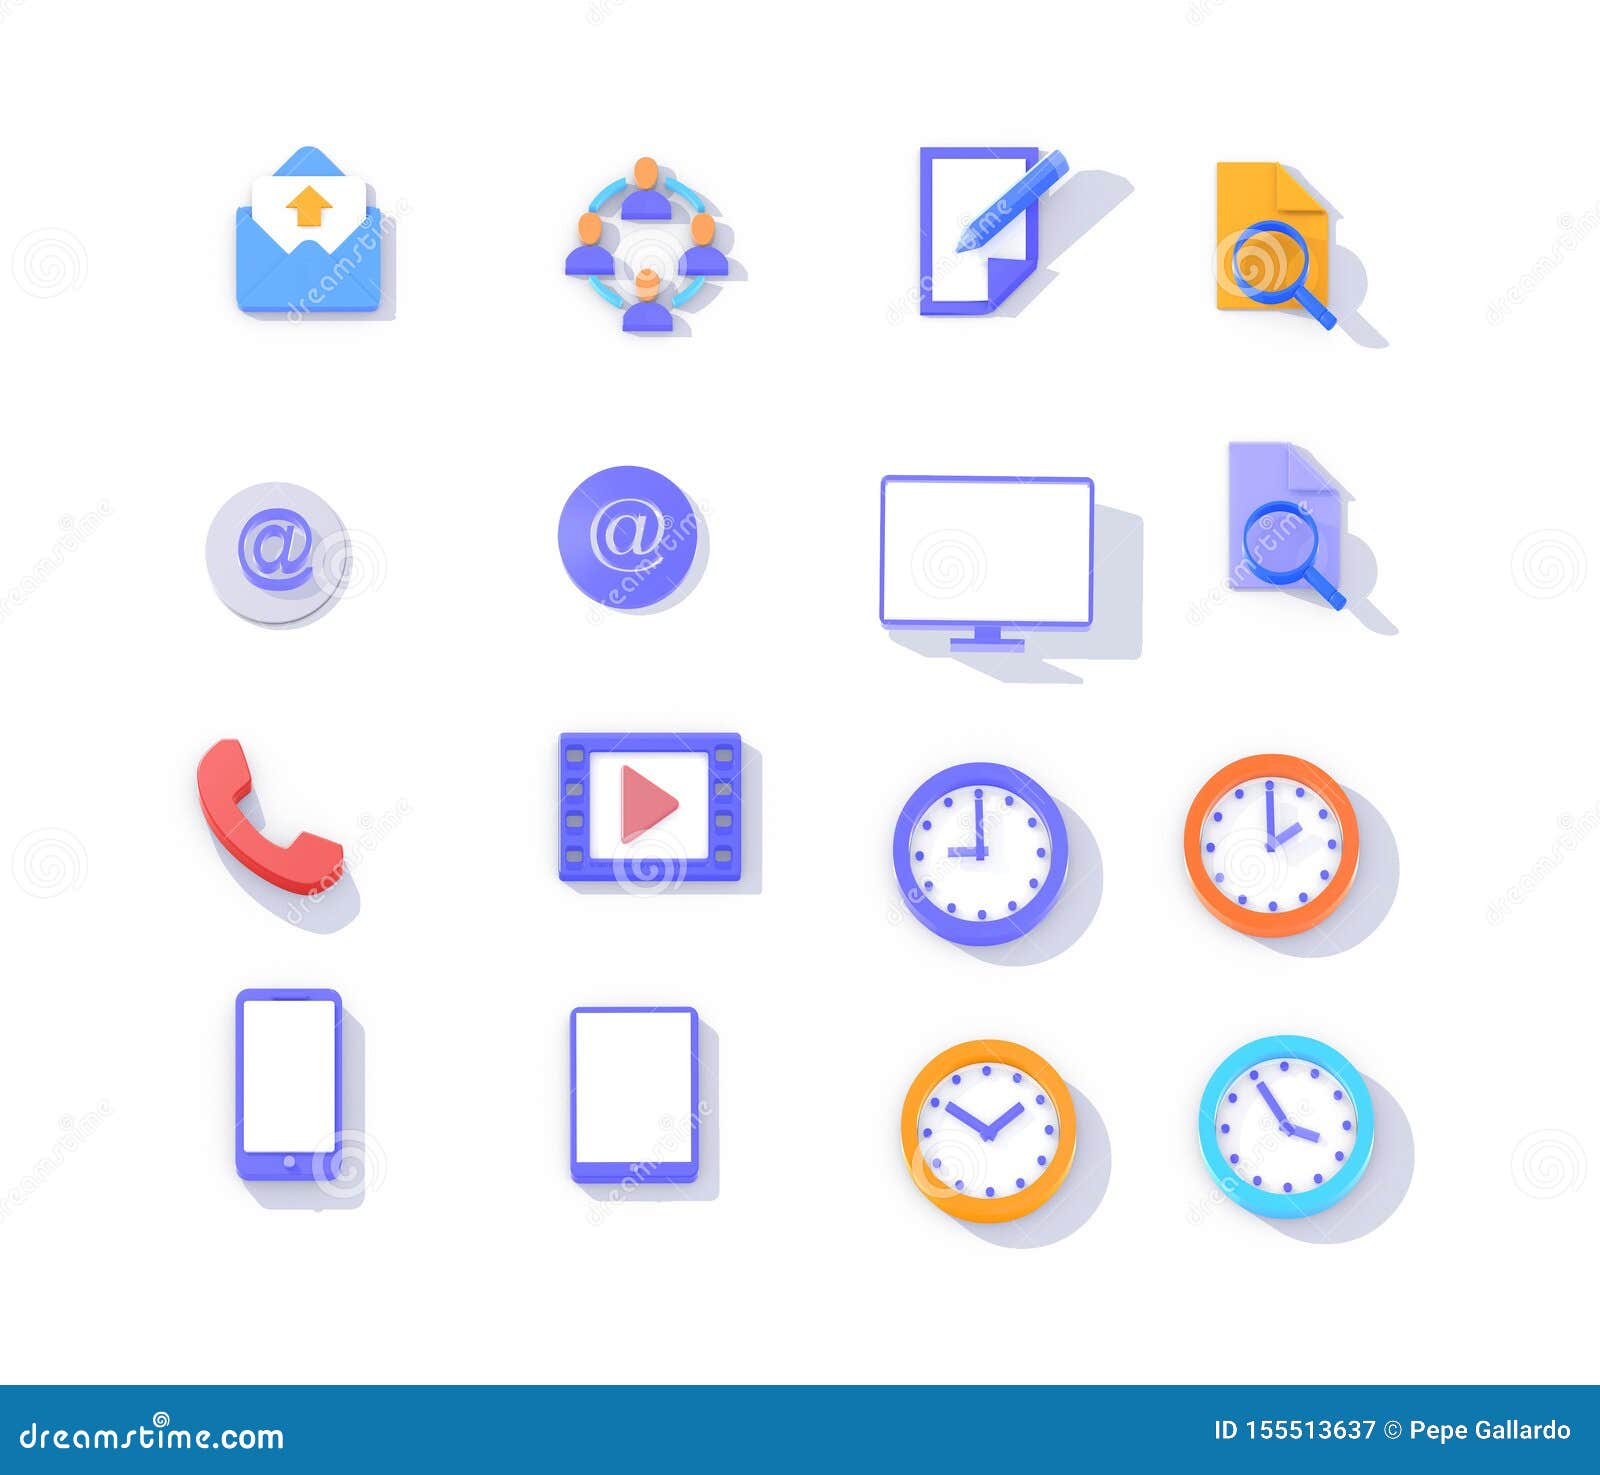  of 3d isometric icons.